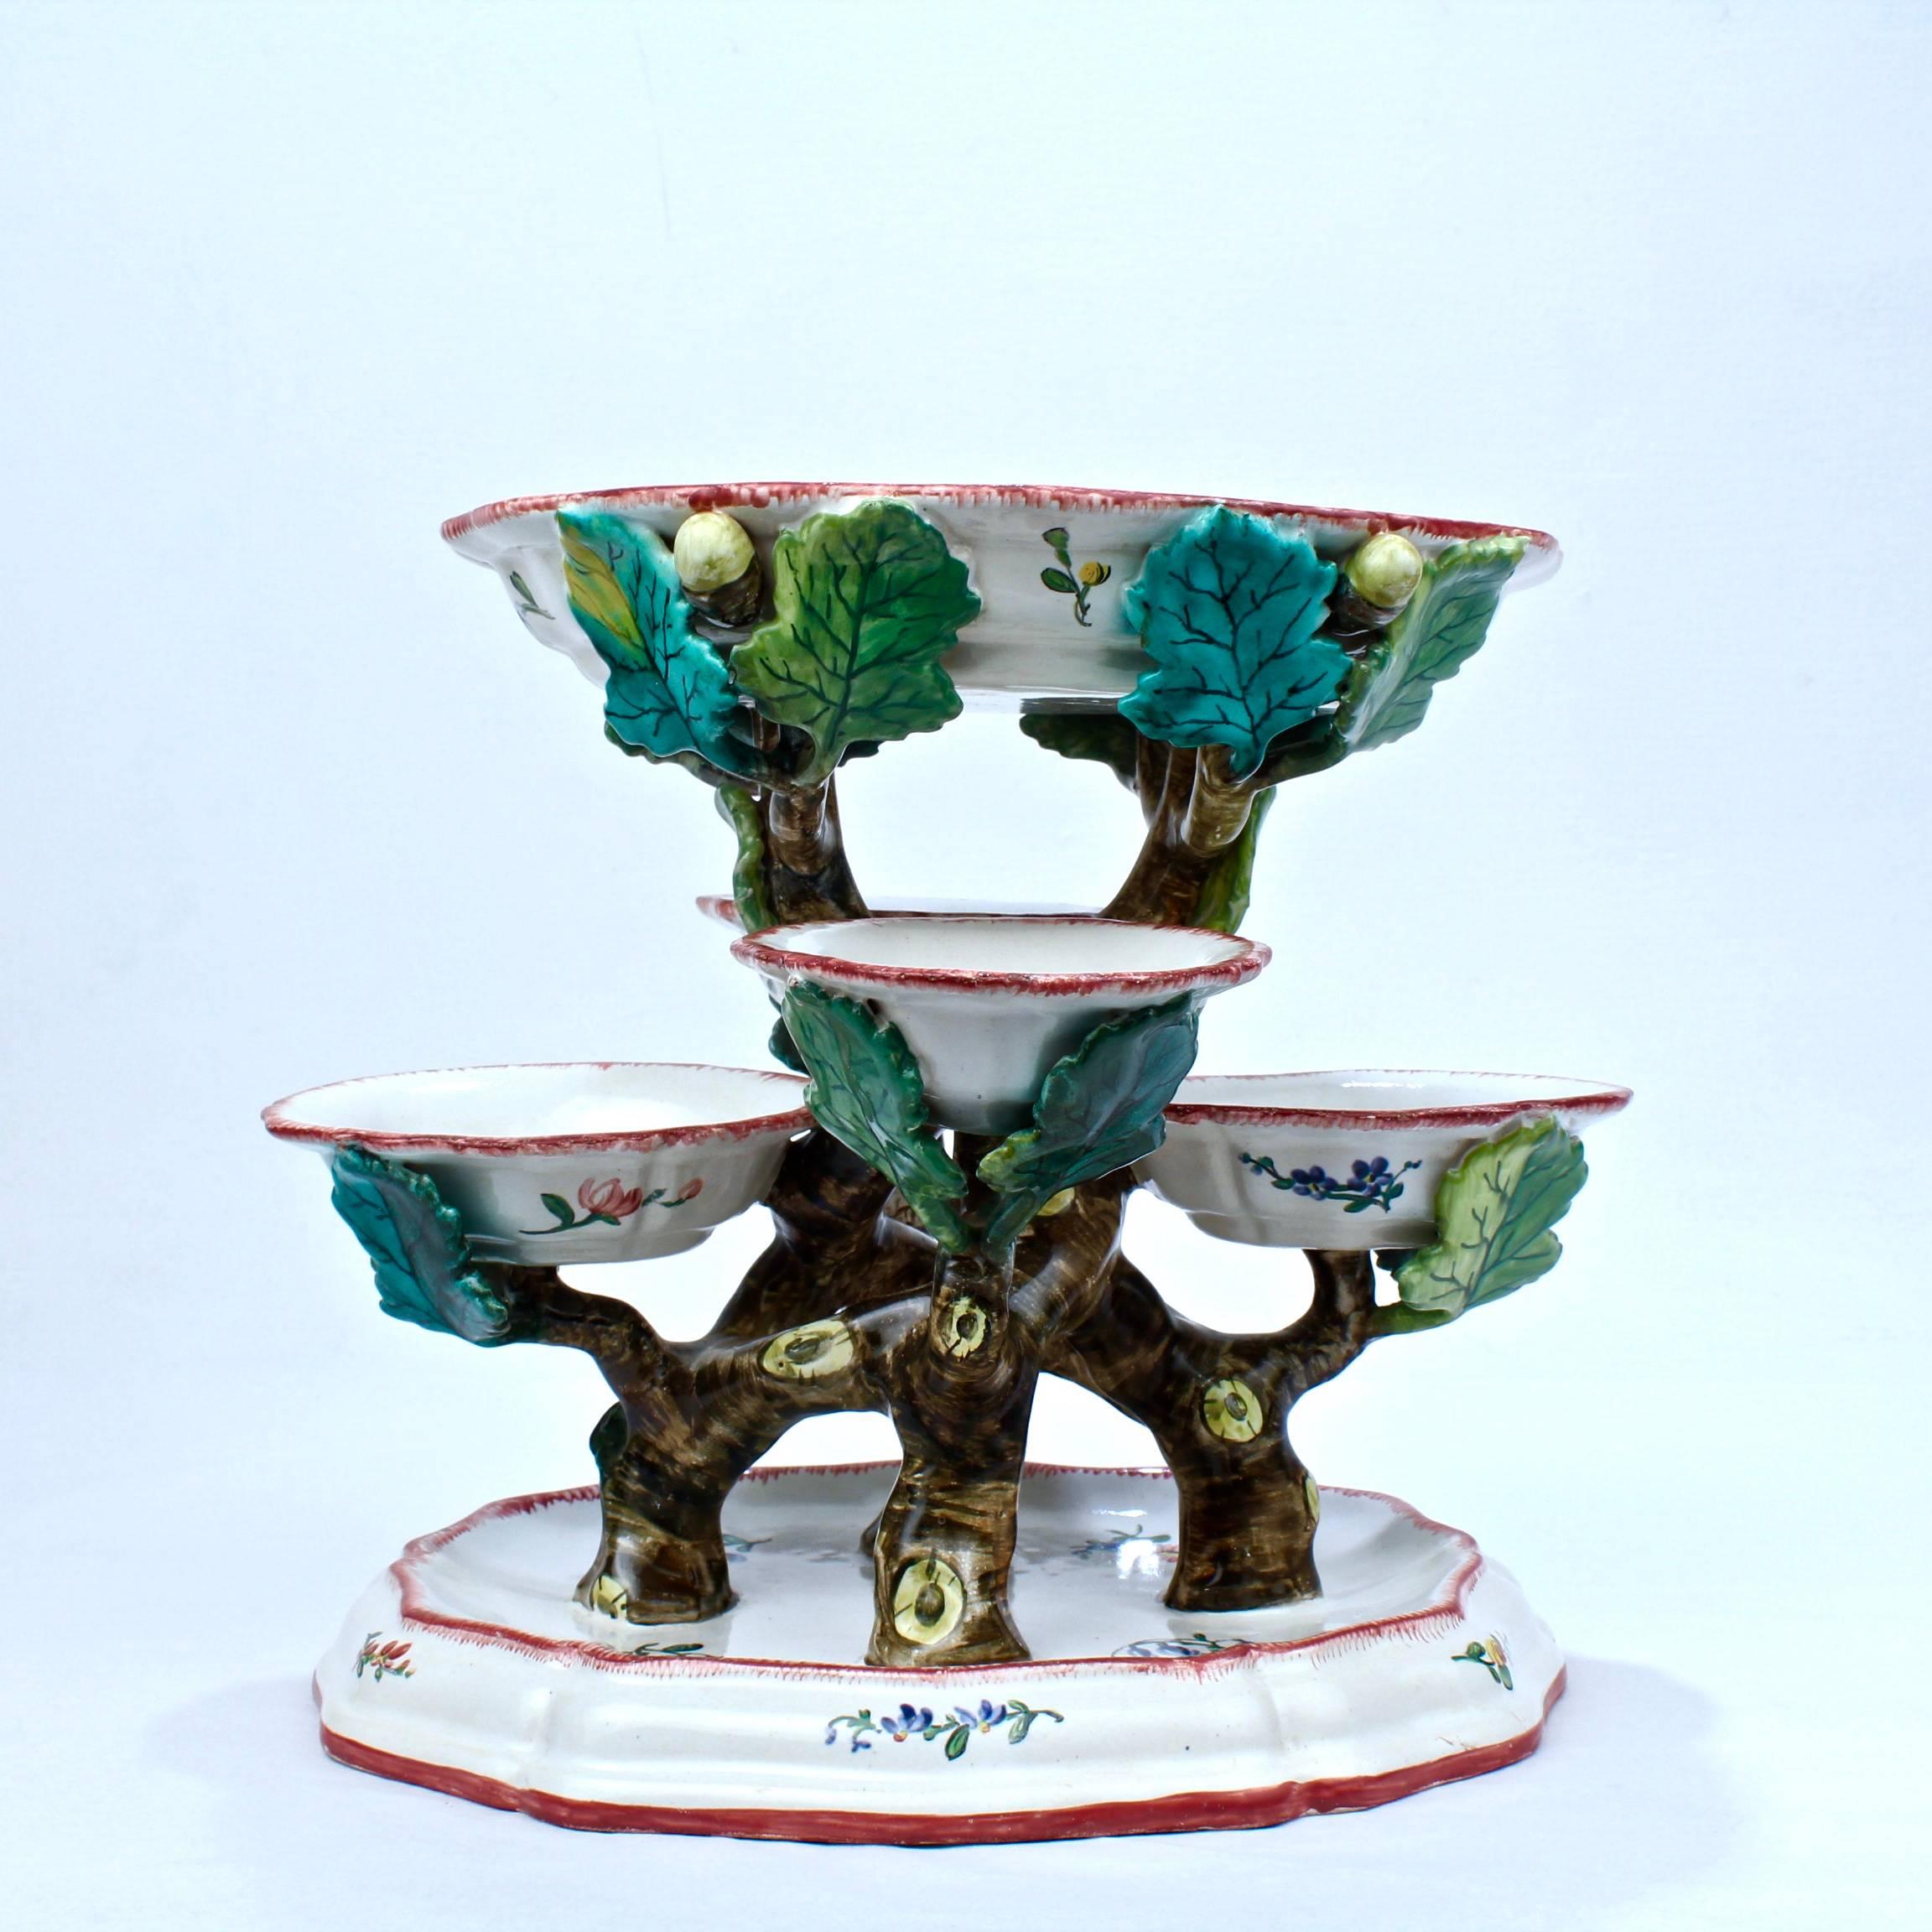 A fine, antique faience figural sweetmeat stand marked for Veuve Perrin.

Five sweetmeat cups rest on figural Intertwined branches and are supported by a conforming inverted foot.

The underside is marked VP.

Height, circa 8 3/4 in.

Items